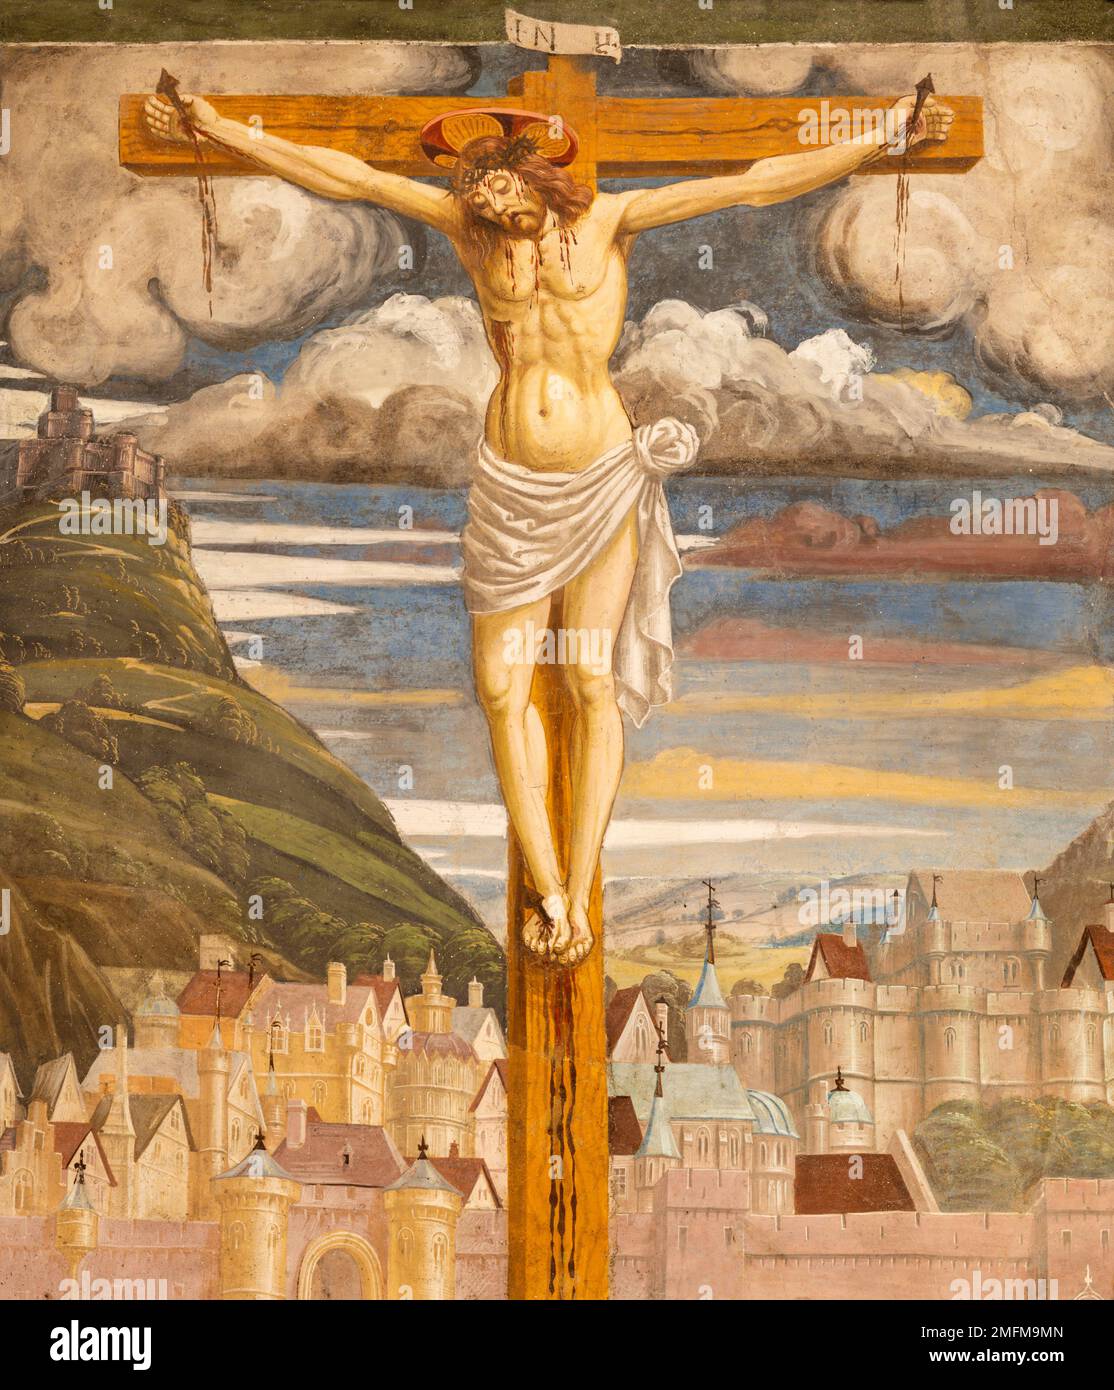 BIELLA, ITALY - JULY 15, 2022: The detail of Crucifixion fresco in the church Chiesa di San Sebastiano by master of Lombard school from 16. cent. Stock Photo